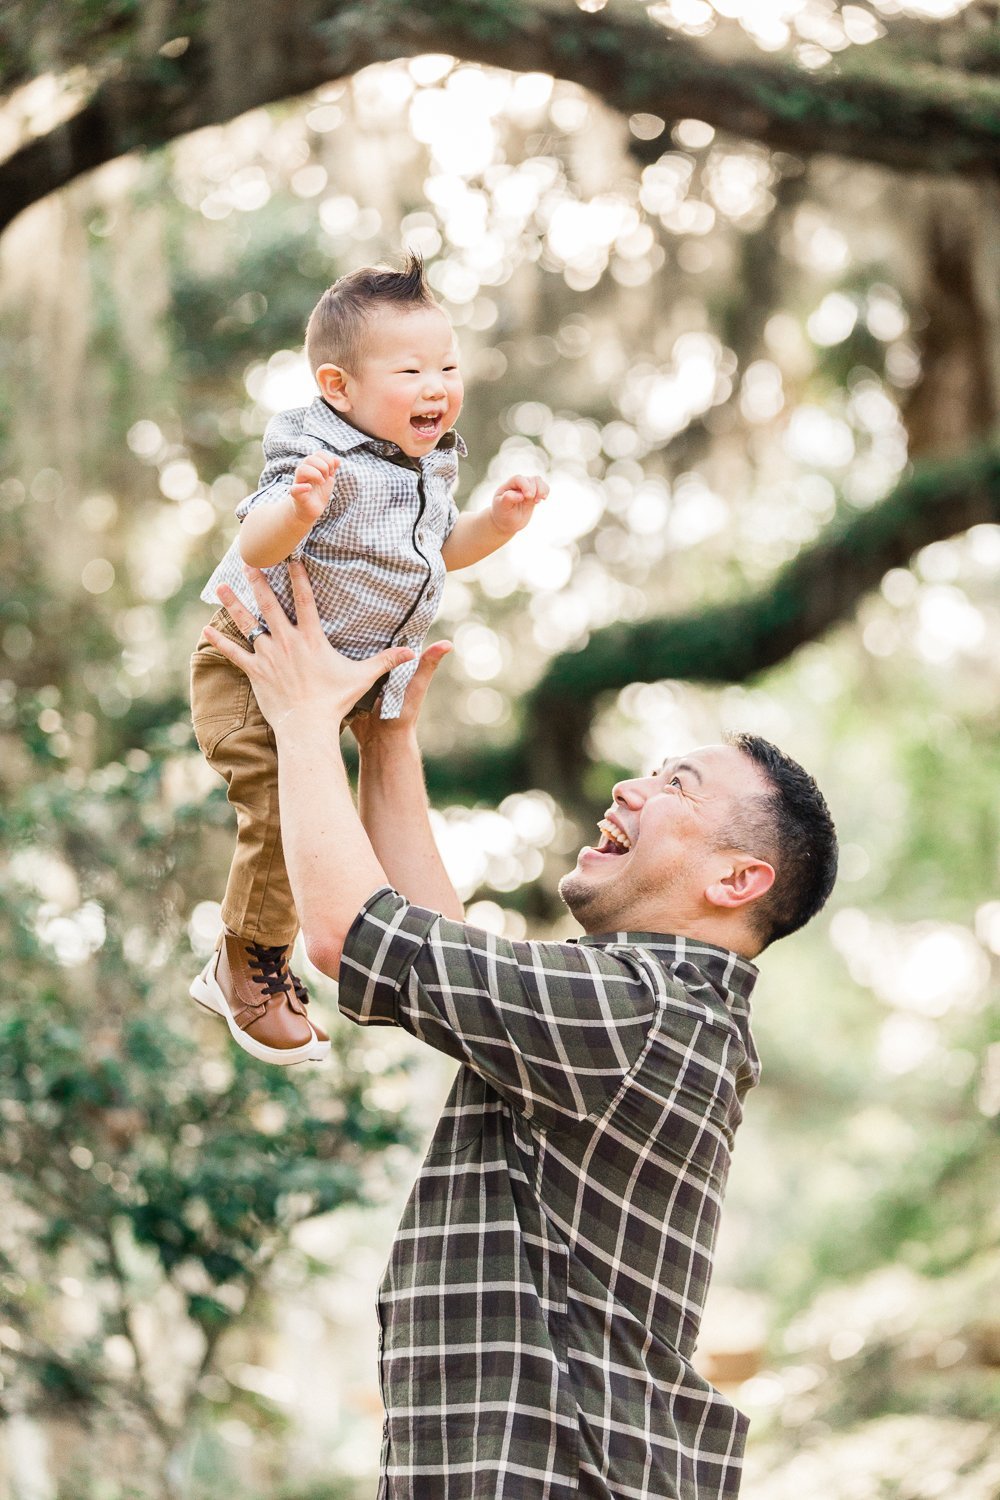 daddy and son picture ideas in Washington oaks